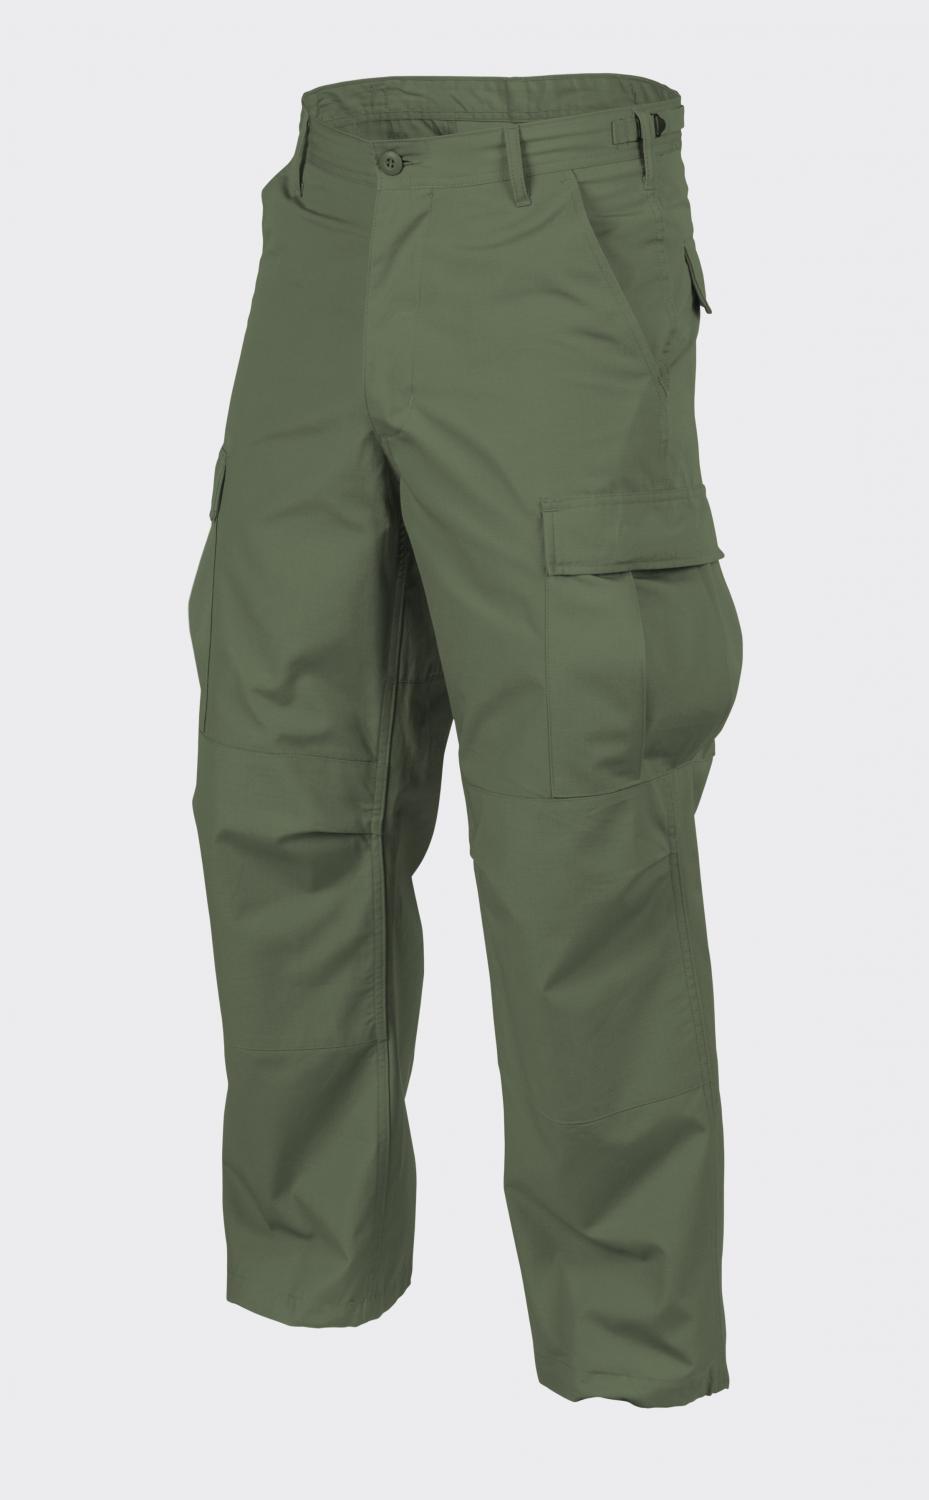 BDU - Cotton Ripstop Olive Green